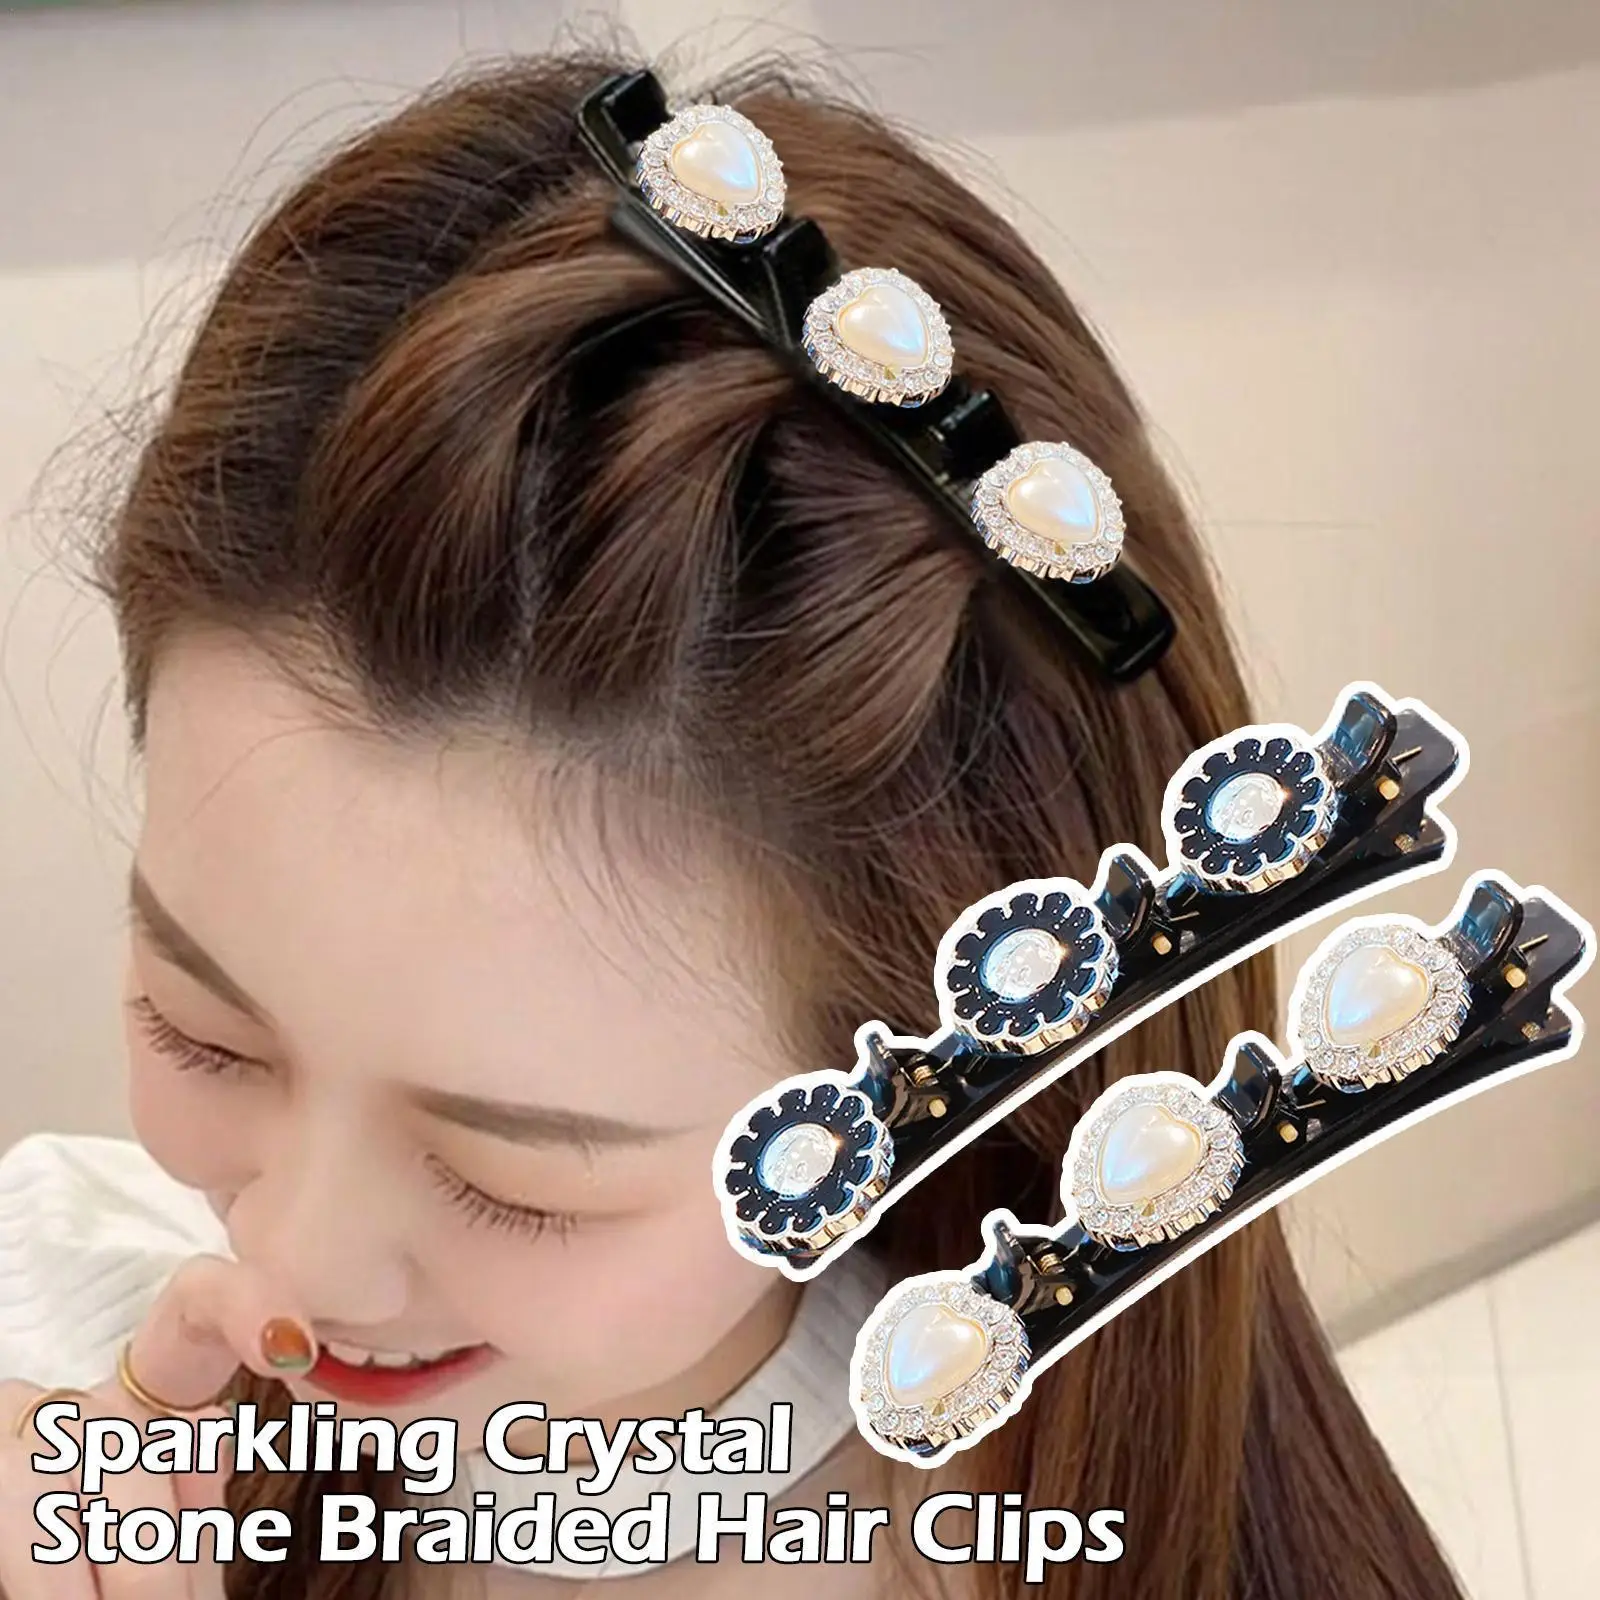 

Sparkling Crystal Stone Braided Hair Clips Braided Double Style Clip Hairpin Bangs Hair Duckbill Teethed Clip Side Korean C J6w3